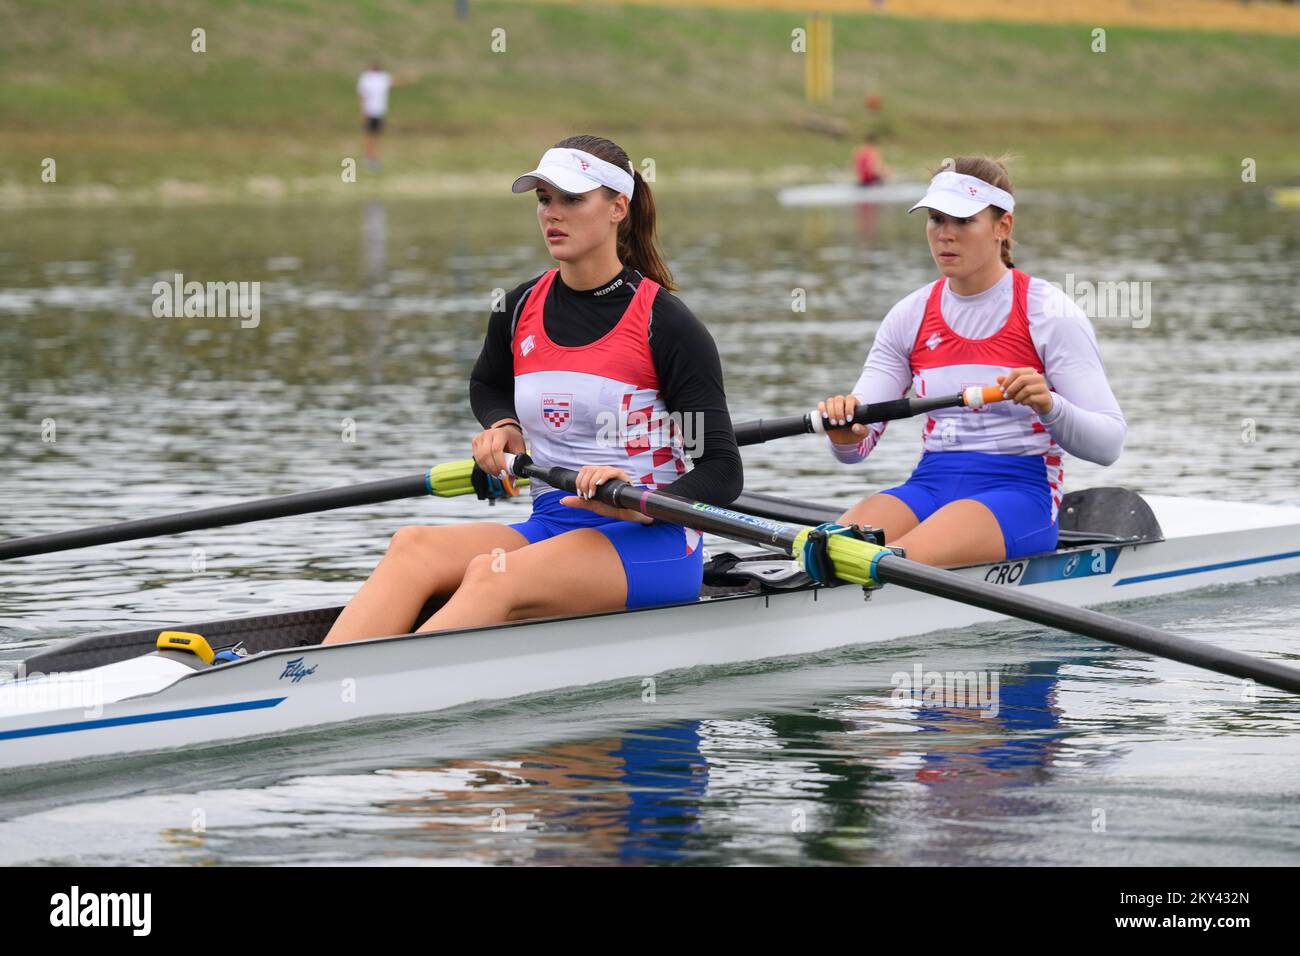 Croatian rowers Ivana and Josipa Jurkovic during Media day at Jarun Lake before departure on World rowing Championships, in Zagreb, Croatia, on September 15, 2022.The 2022 World rowing Championships will take place 18-25 September, 2022 in Racice, Czech Republic. Photo: Davor Puklavec/PIXSELL  Stock Photo